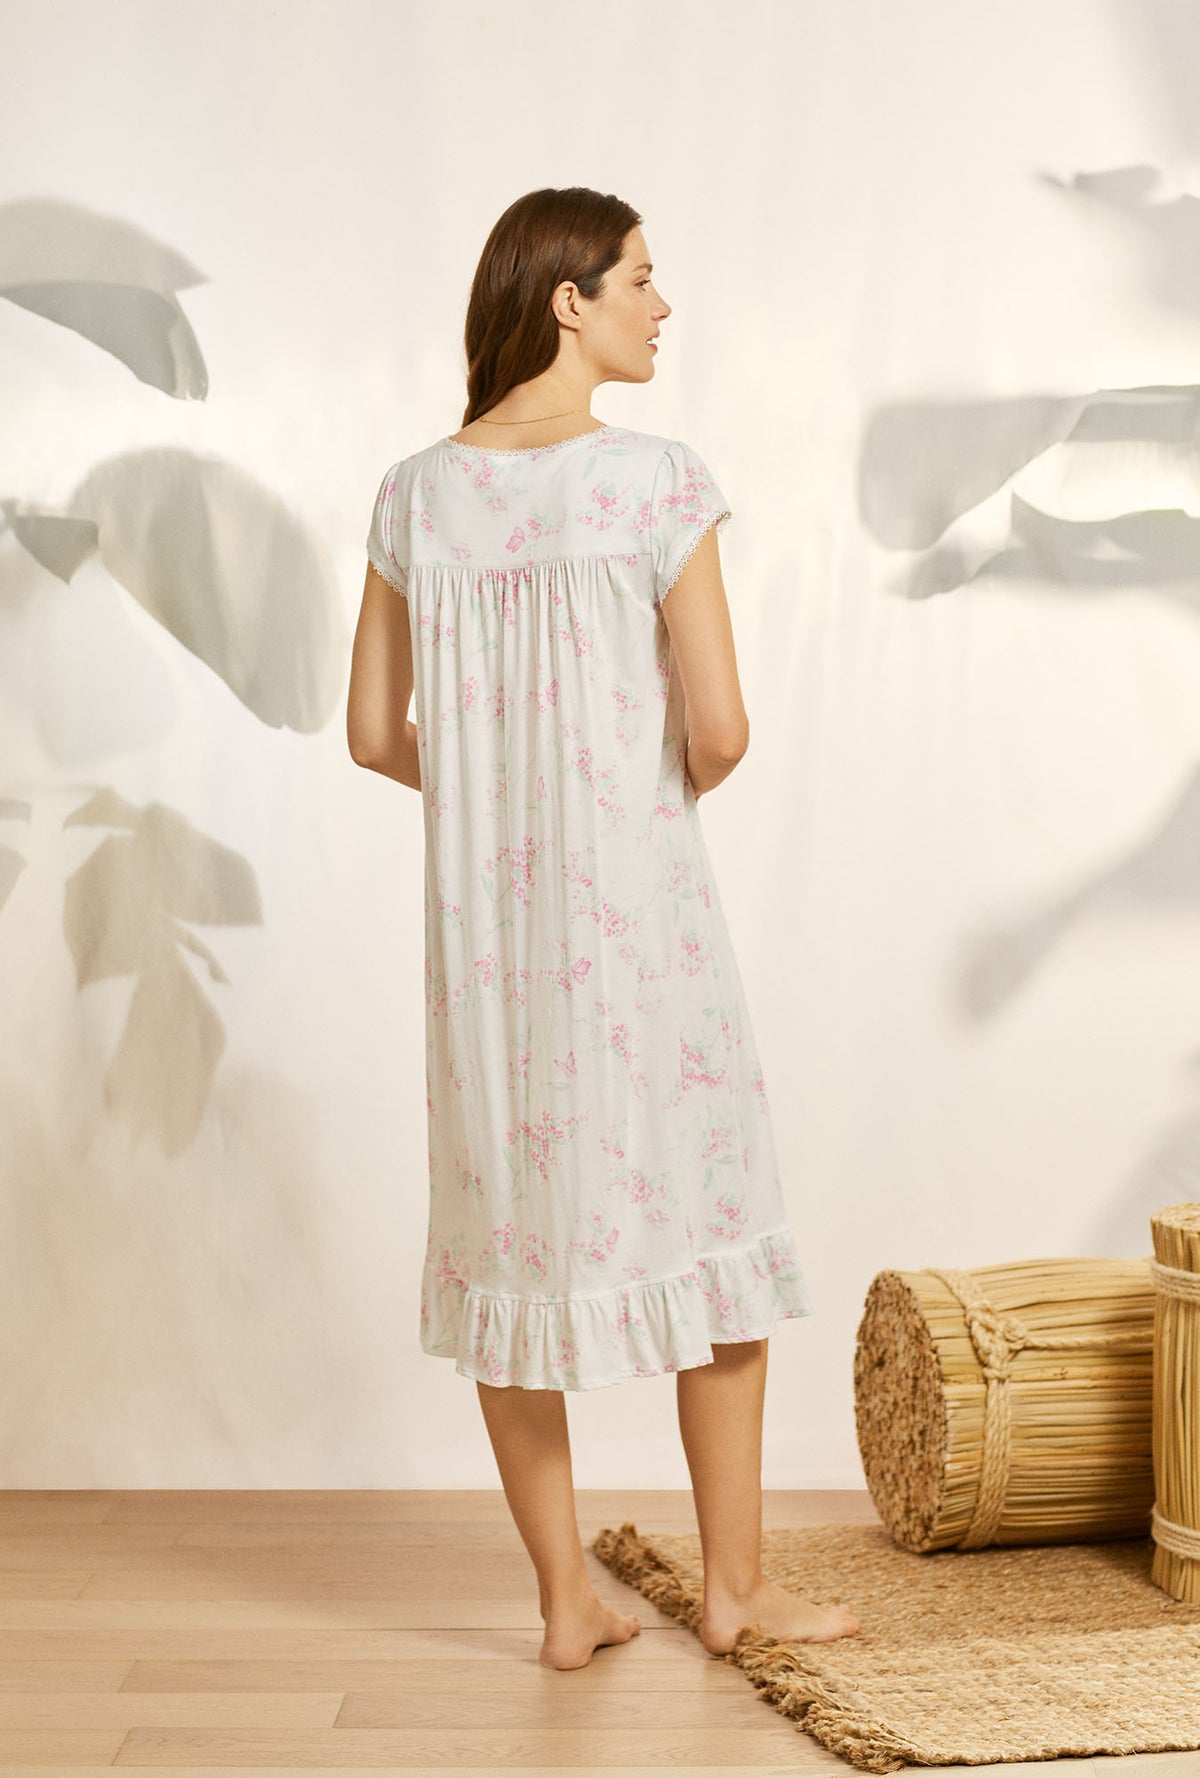 A lady wearing white cap sleeve knit waltz nightgown with butterfly floral print.